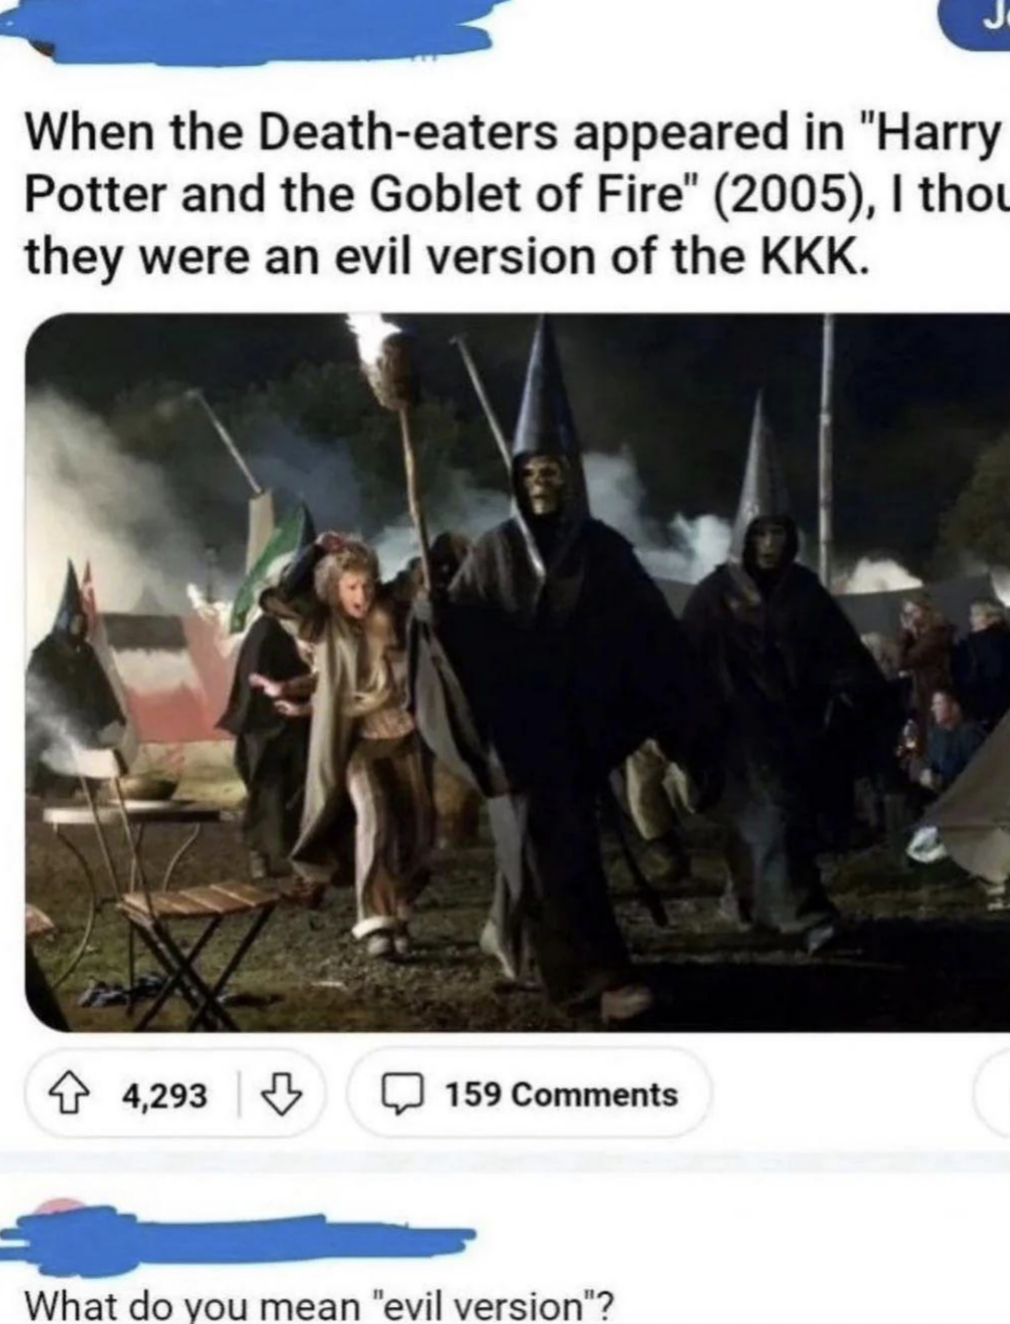 A meme comparing Death Eaters from &quot;Harry Potter and the Goblet of Fire&quot; to the KKK, with a humorous comment below: &quot;What do you mean &#x27;evil version&#x27;?&quot;